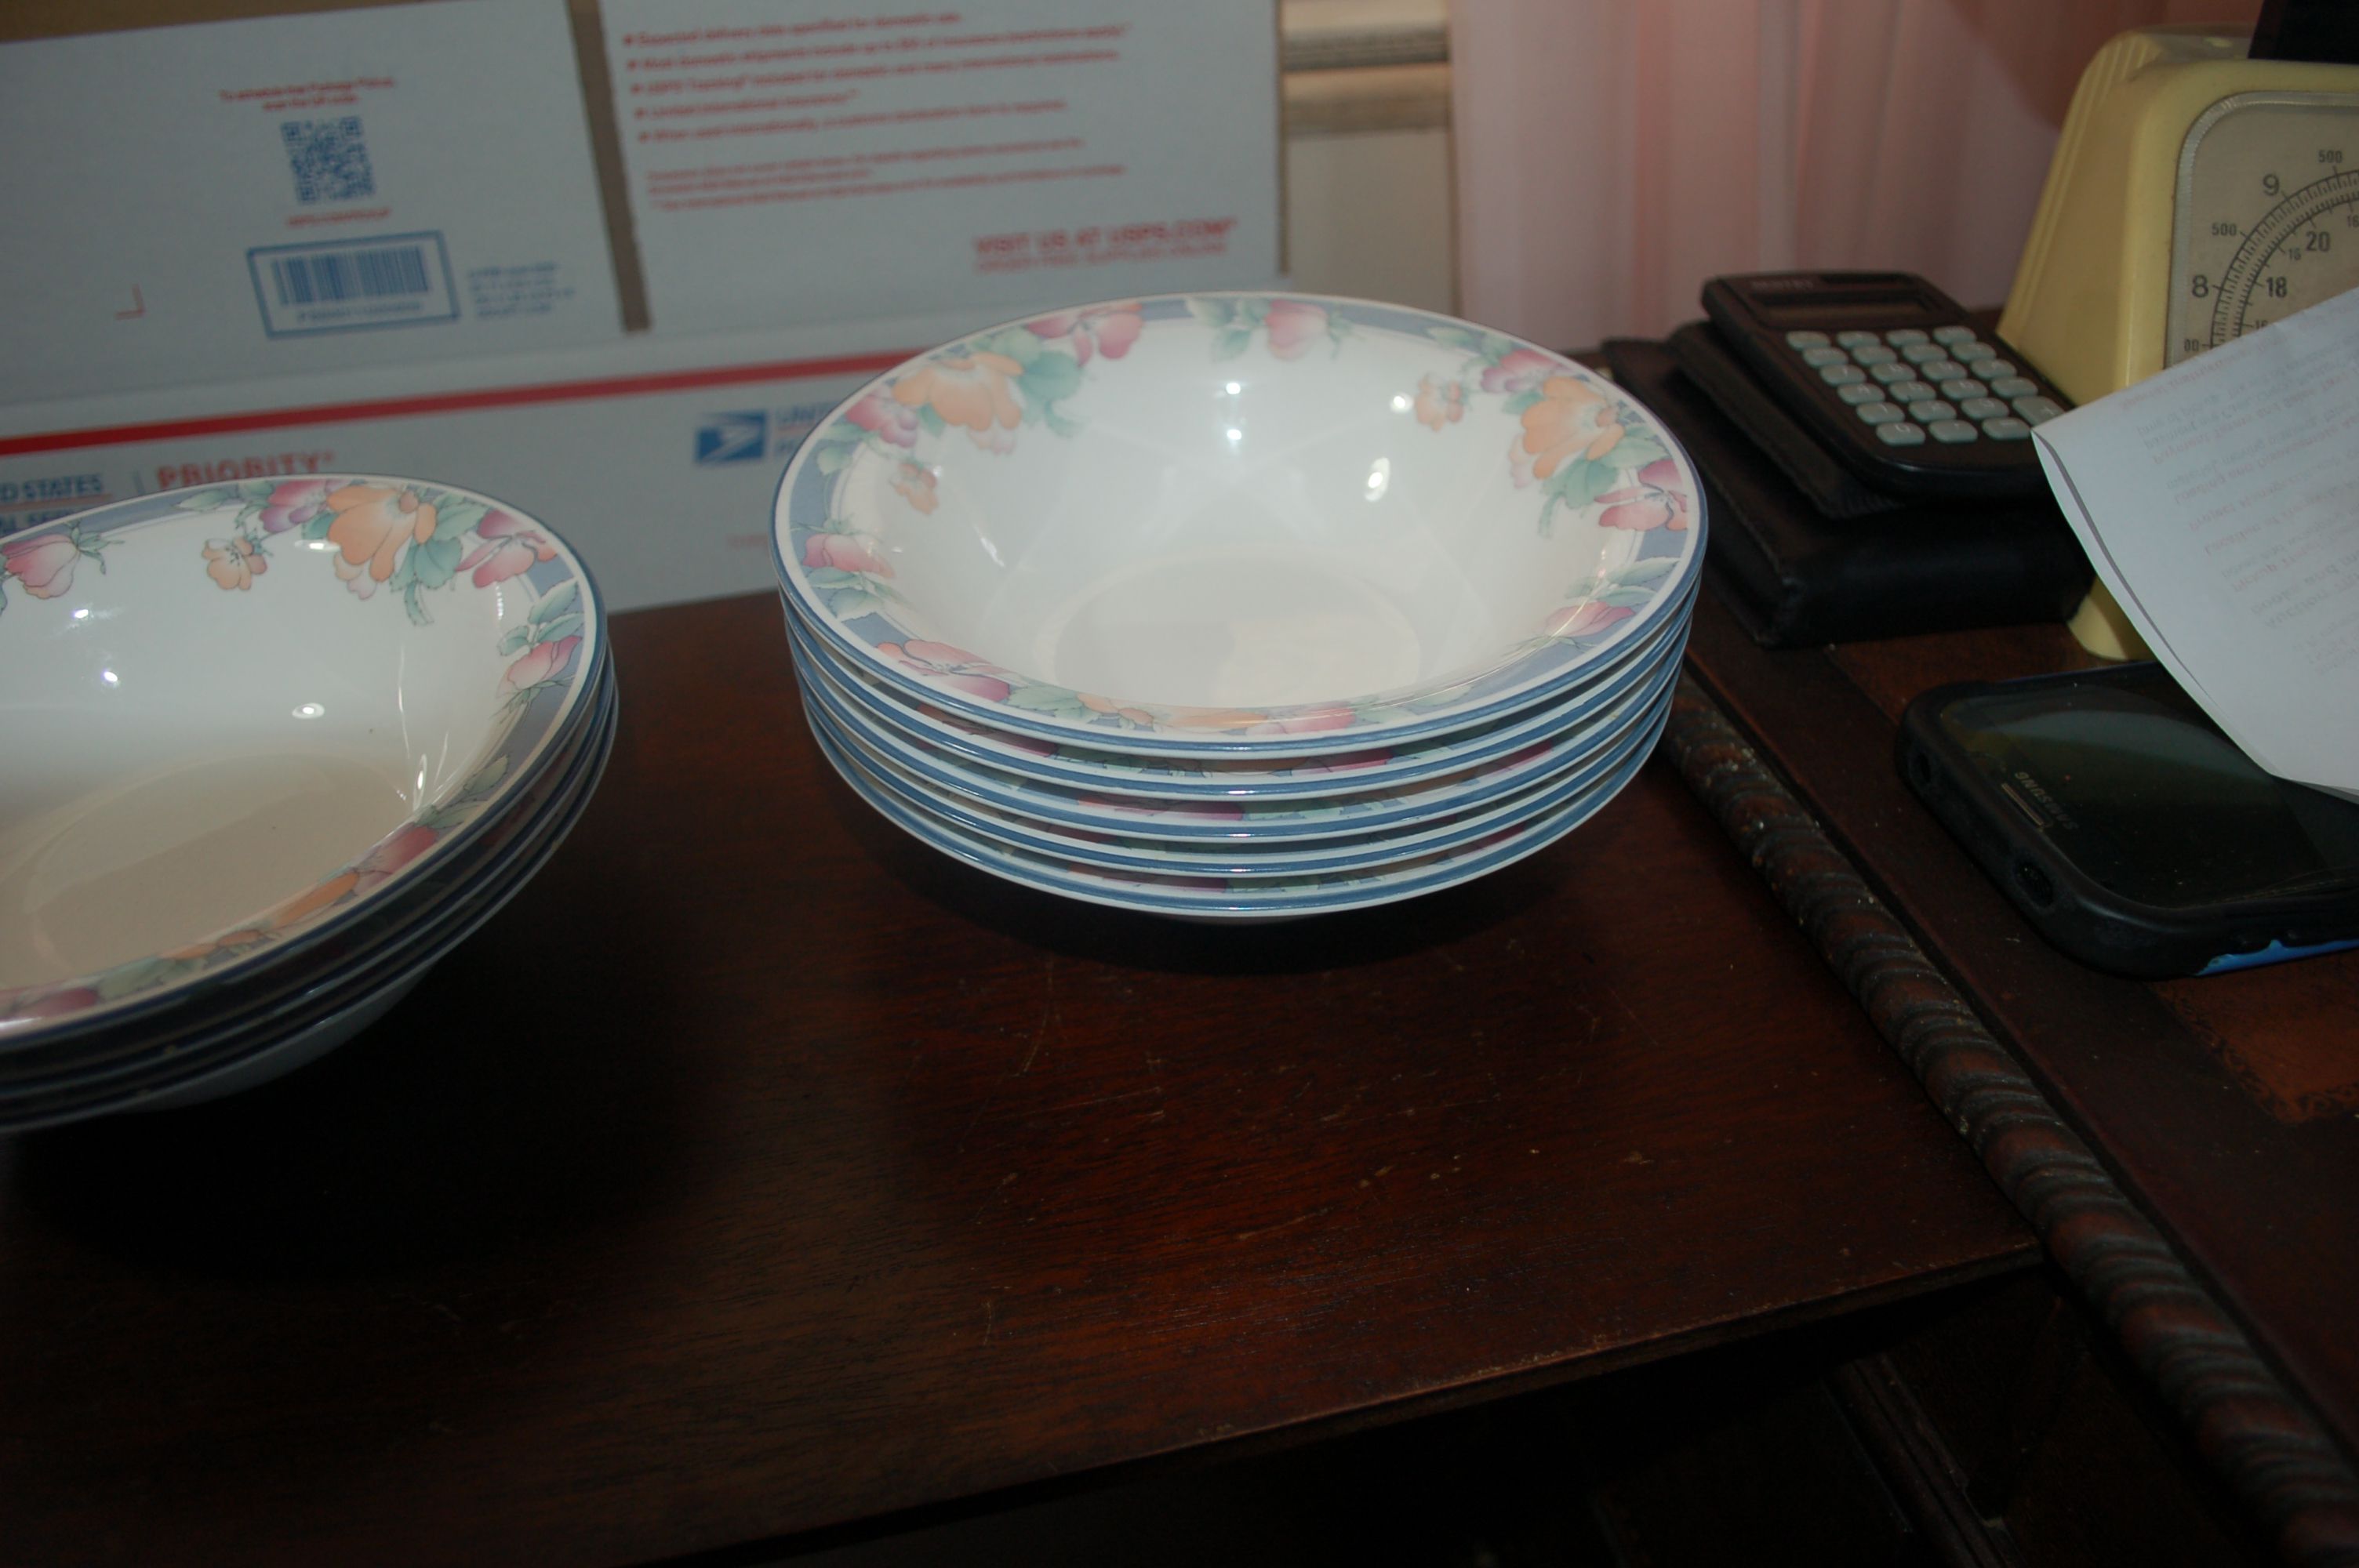 NORITAKE SPRING BLUSH SOUP/CEREAL/BERRY BOWL 7X2 INCHES, 5 GREAT USED CONDITION. HAVE 3 WITH CHIPS YOU CAN HAVE FOR FREE IF YOU WANT?